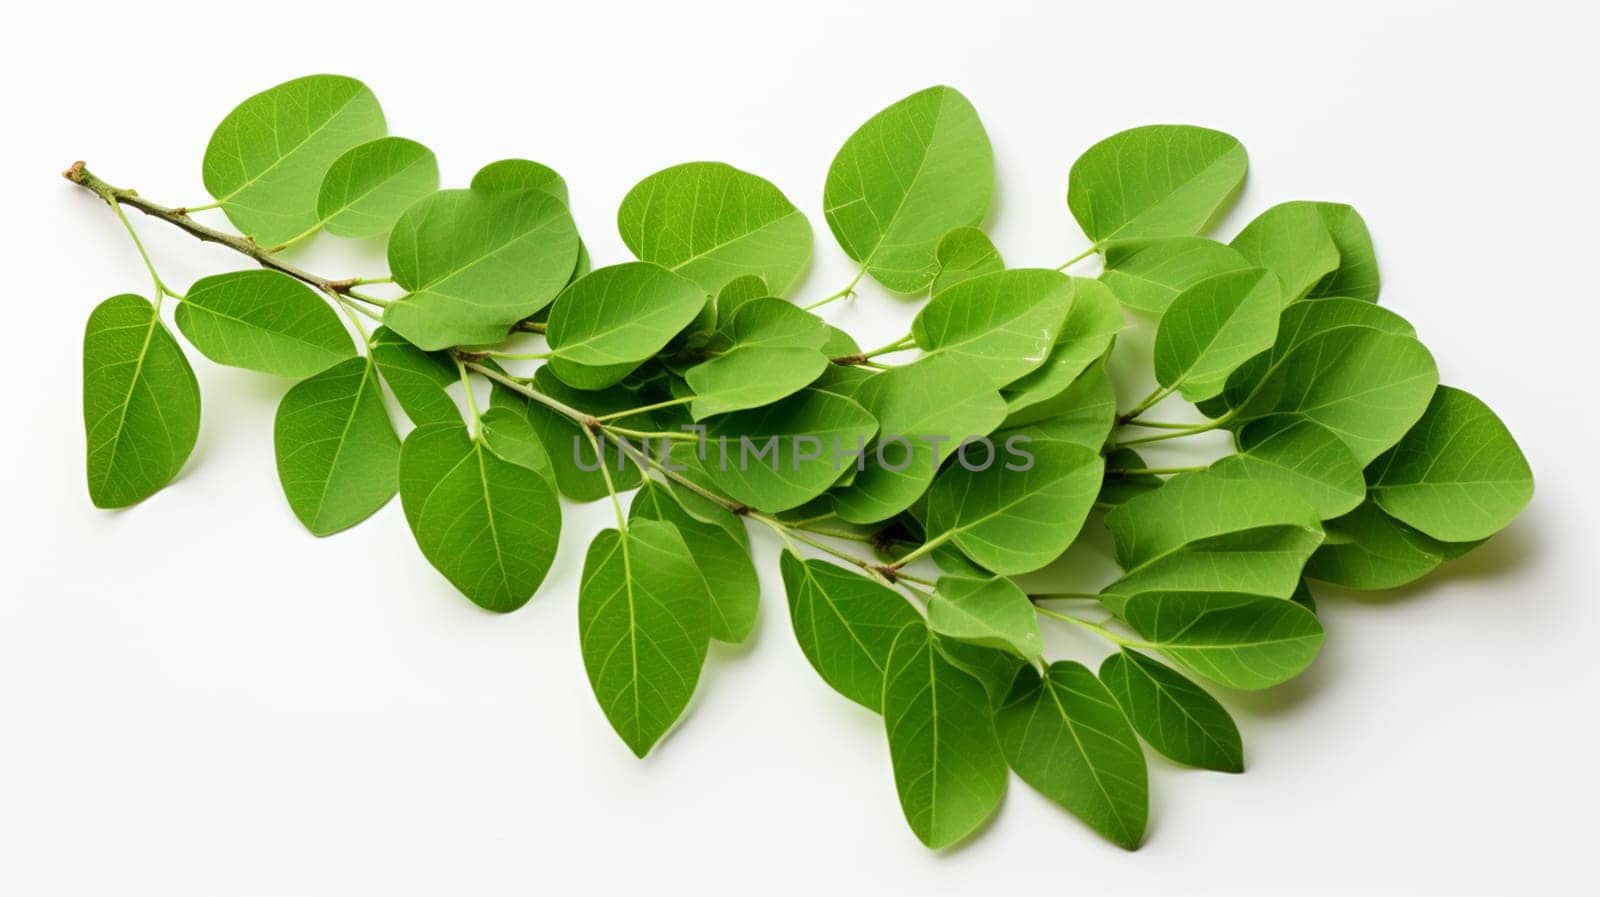 Green Moringa leaves  on white background with clipping path. Studio shot.Generate Ai by Mrsongrphc